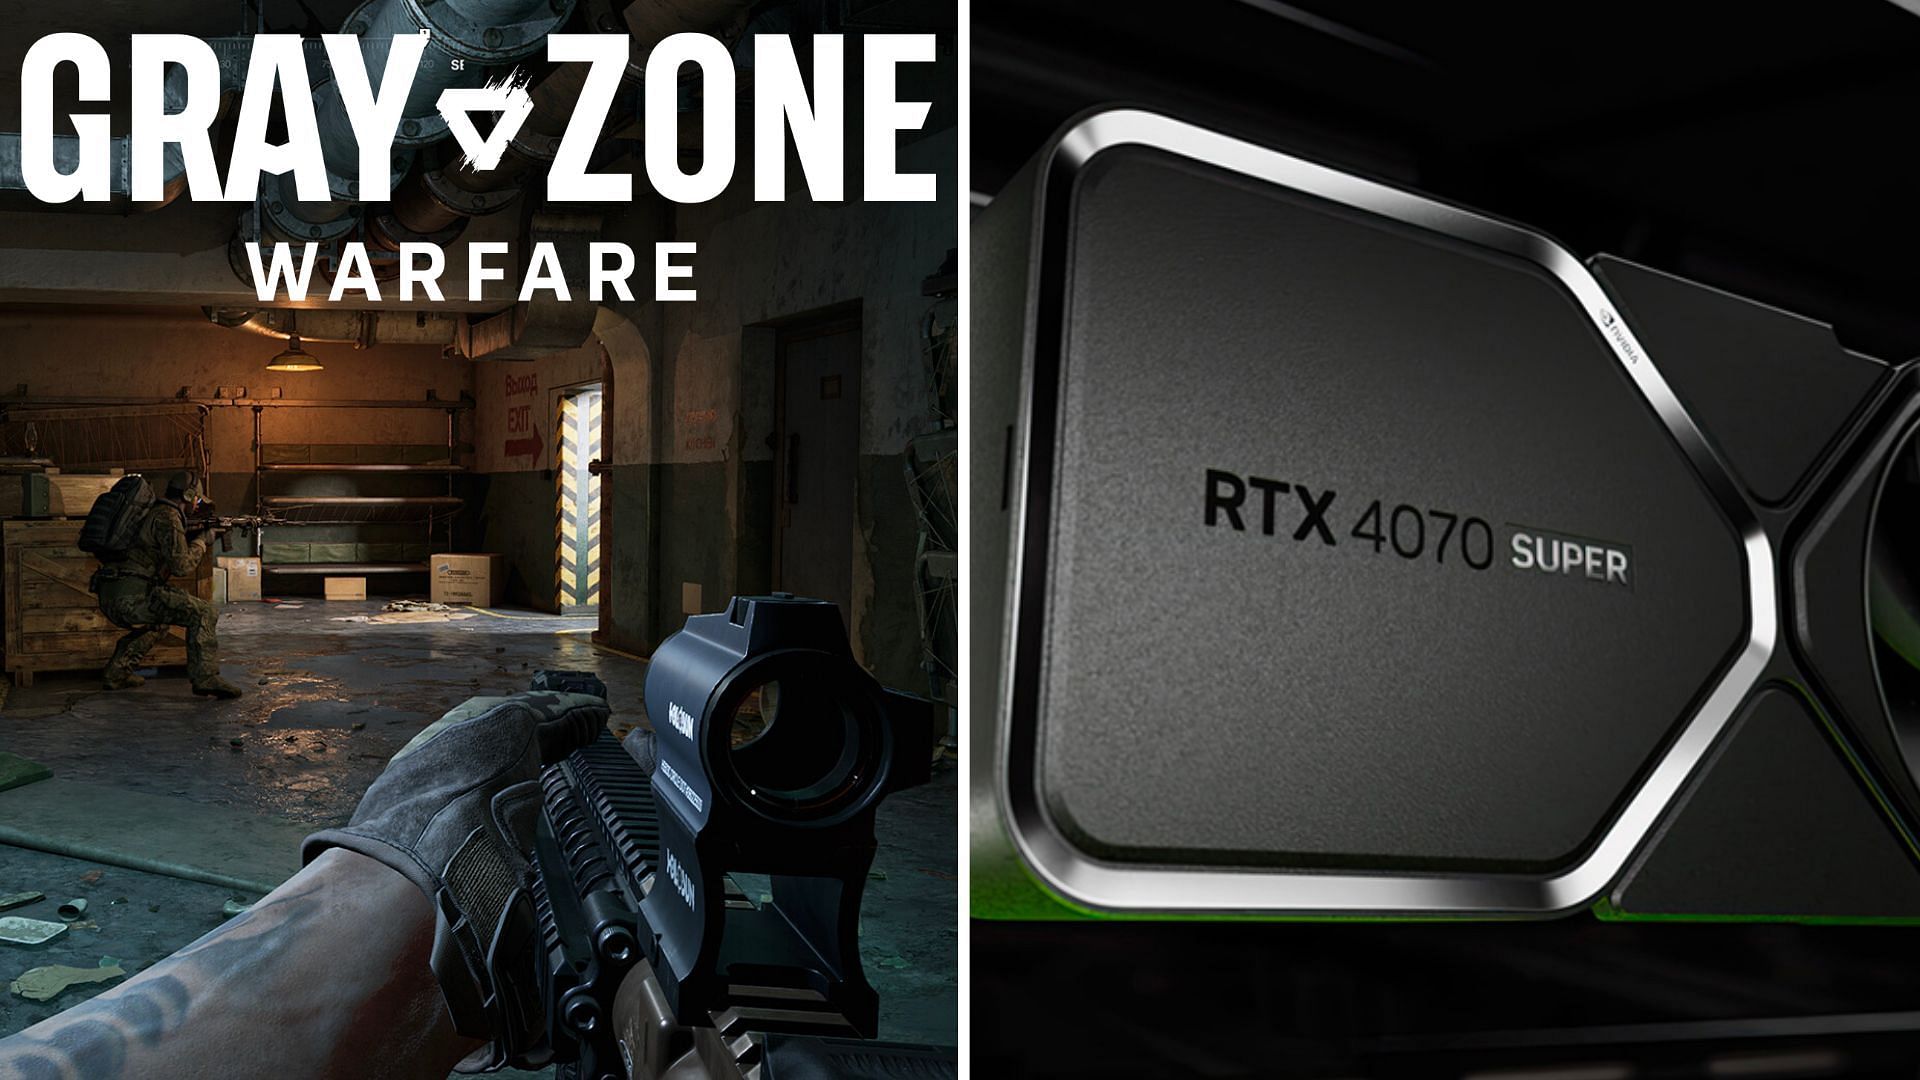 The RTX 4070 and 4070 Ti are some of the best graphics cards for Gray Zone Warfare (Image via Steam and Nvidia)